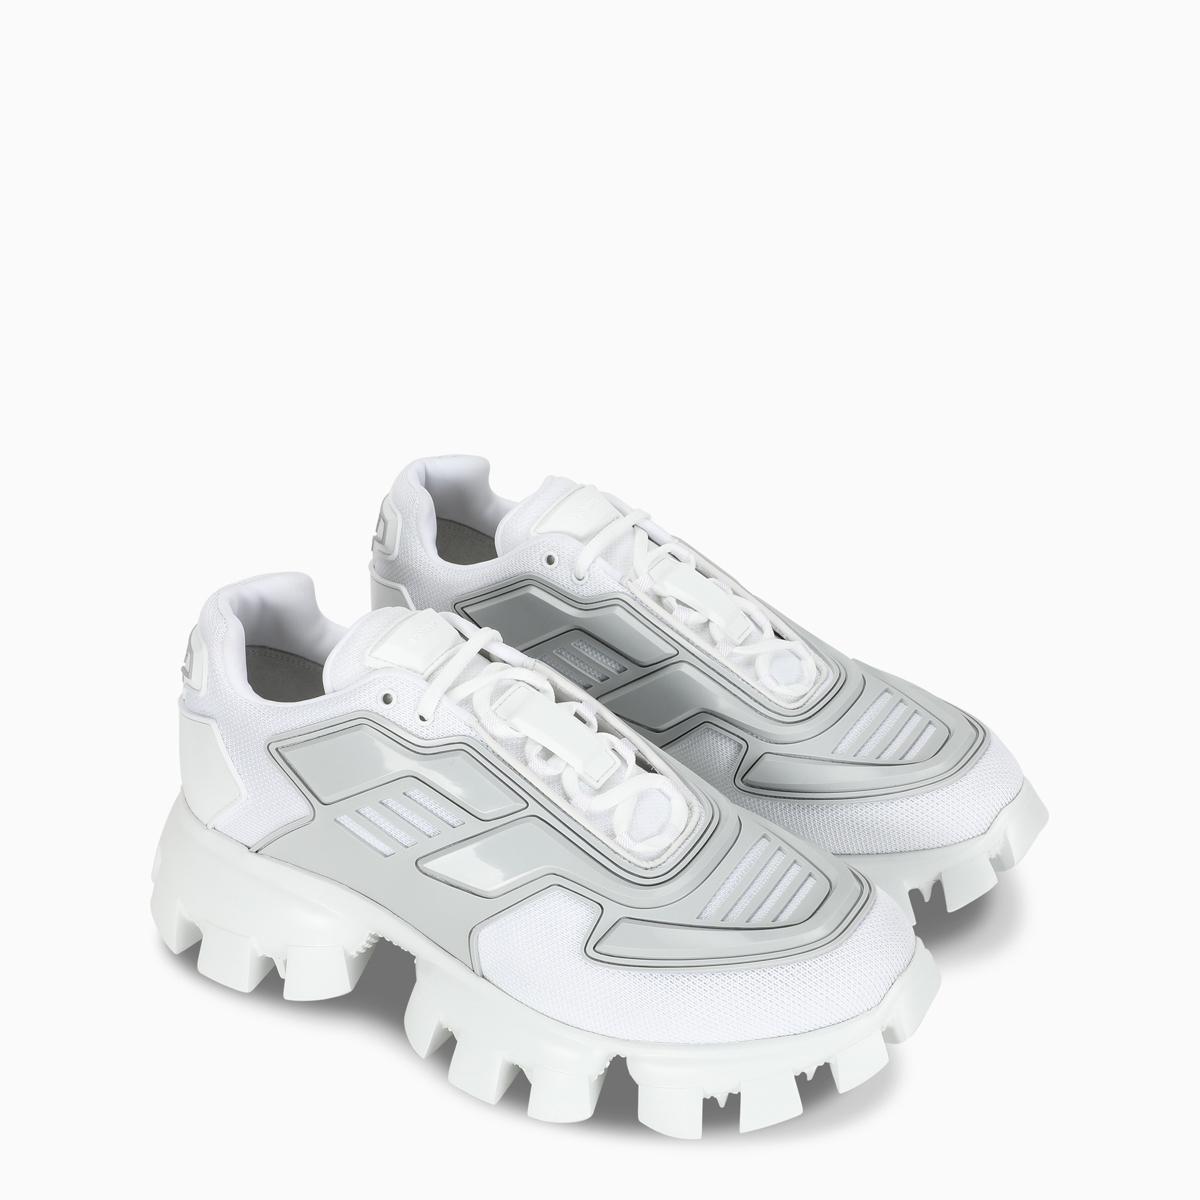 Prada Rubber White Cloudbust Thunder Sneakers for Men - Save 6% - Lyst